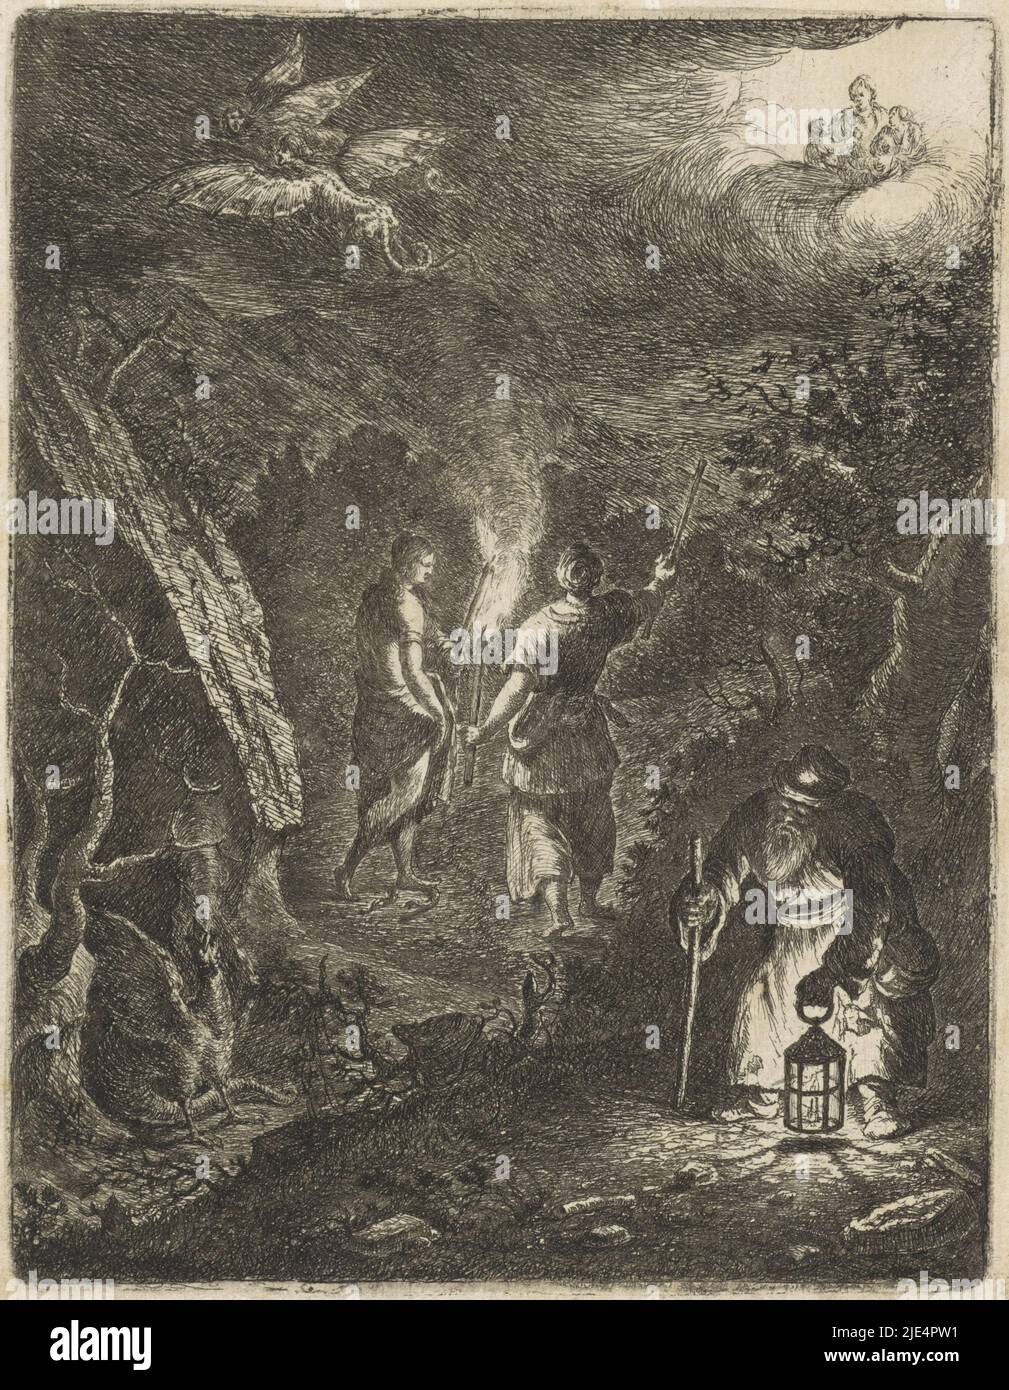 A young man with a torch is accompanied by Faith on a road, also with a torch in his hand and a crucifix. The road leads to Caritas, in the clouds, although above and below devils can also be seen. On the right Diogenes with a lantern, Allegory of the way of true love., print maker: Johannes Vorsterman, (mentioned on object), Zaltbommel, 1661, paper, etching, h 168 mm × w 129 mm Stock Photo